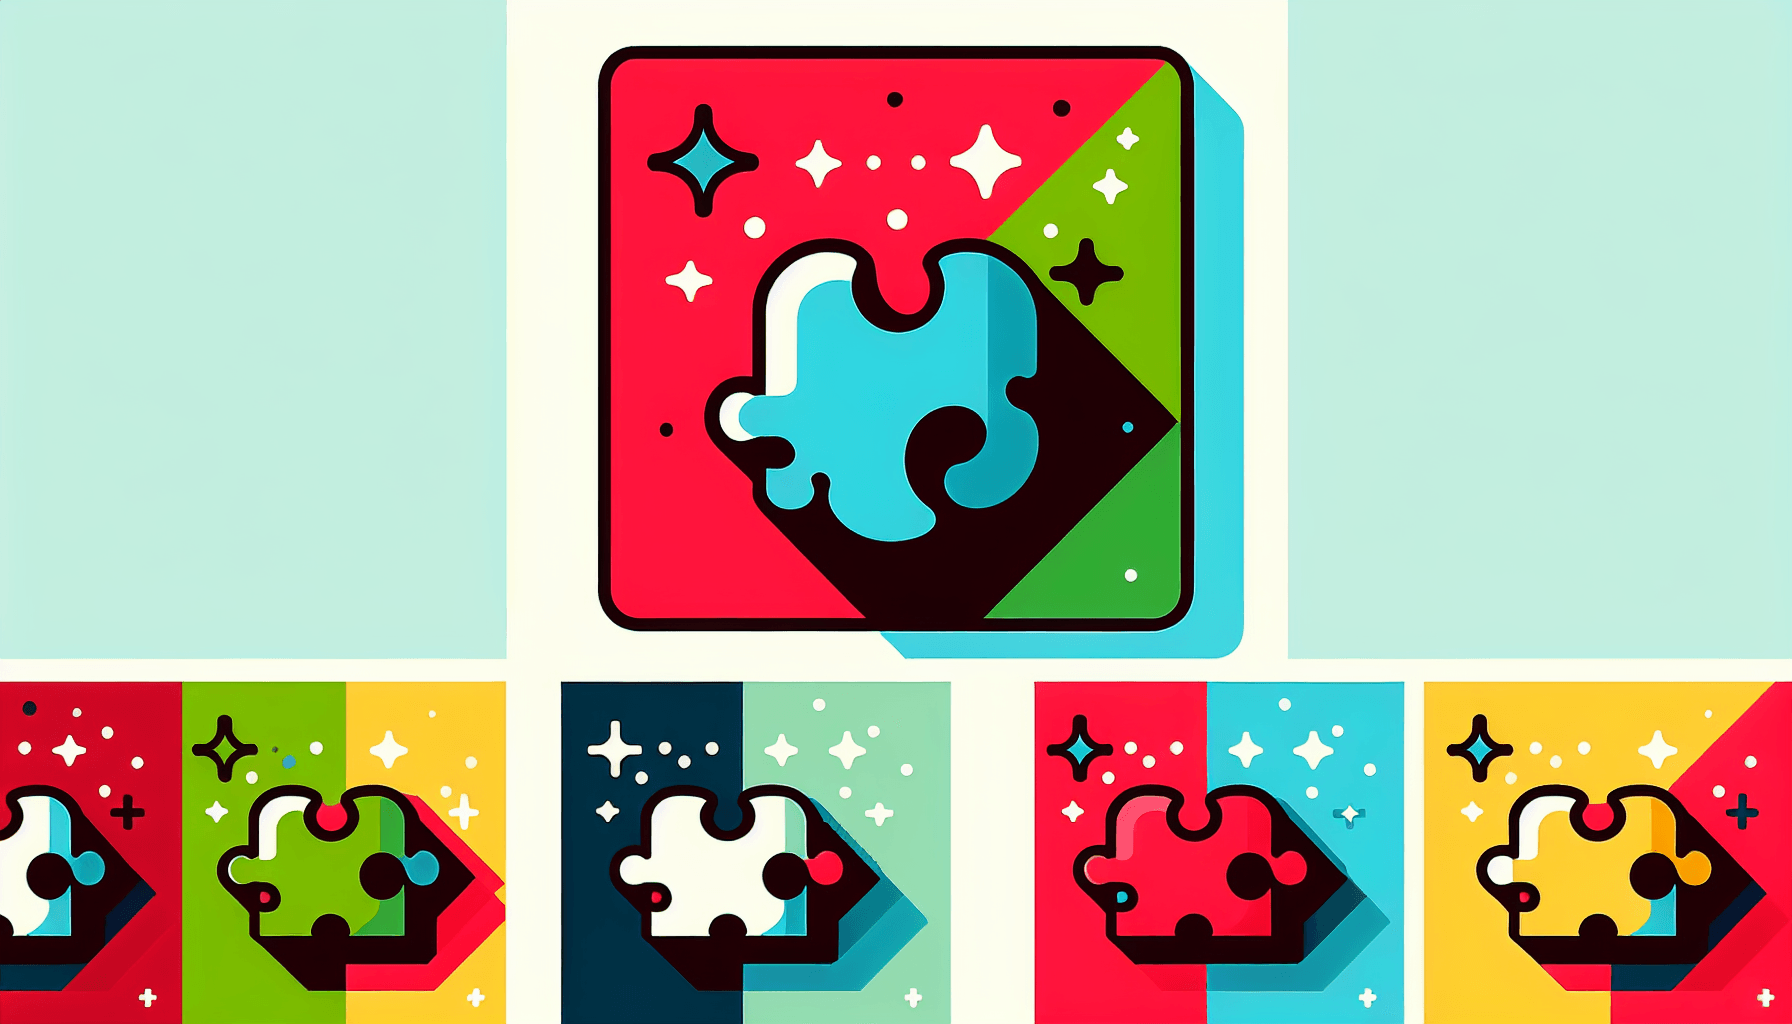 Missing piece in flat illustration style and white background, red #f47574, green #88c7a8, yellow #fcc44b, and blue #645bc8 colors.